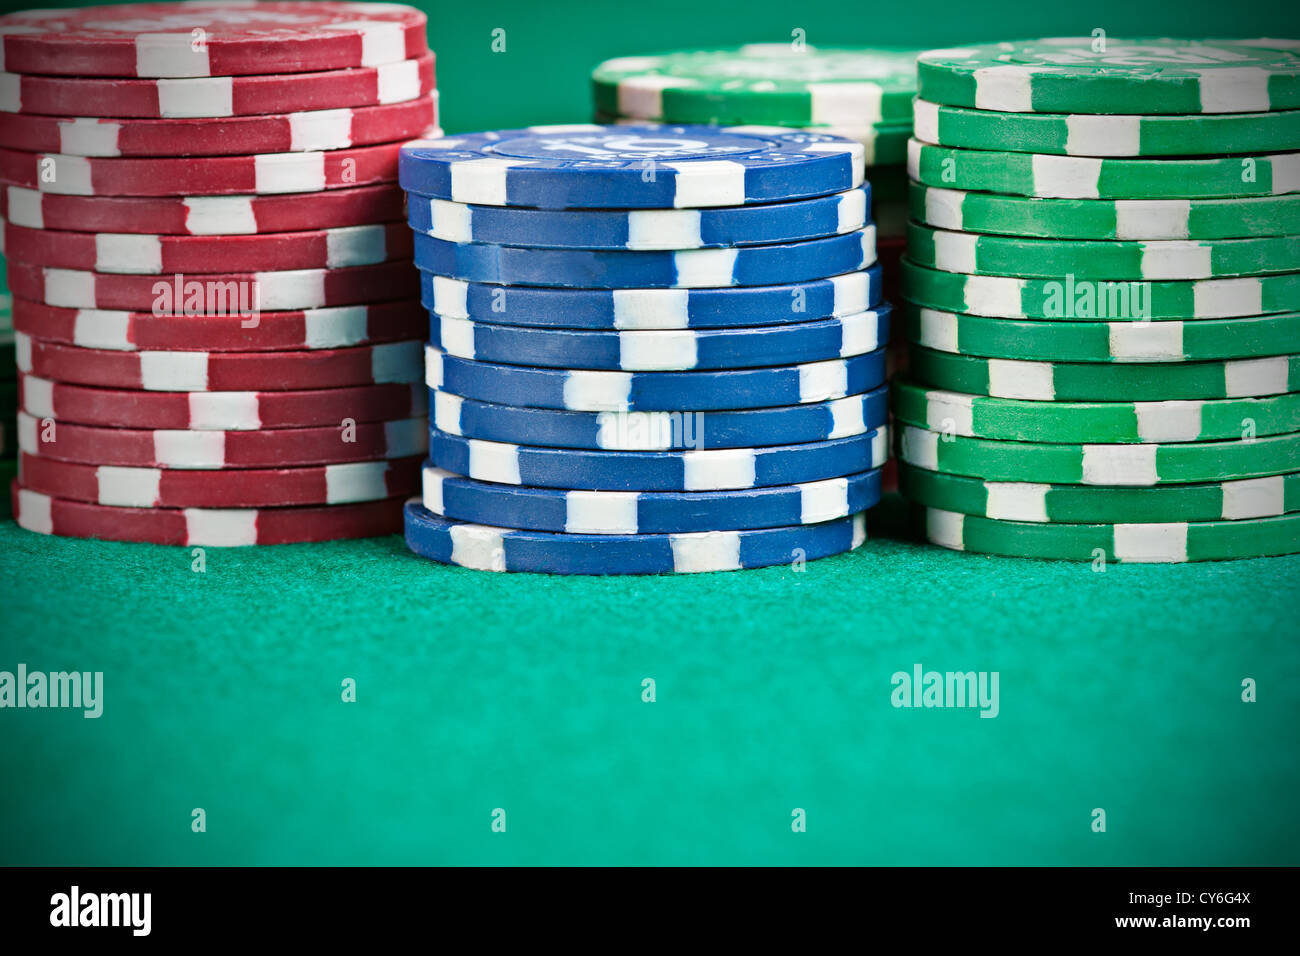 Pile of poker chips on a poker table Stock Photo